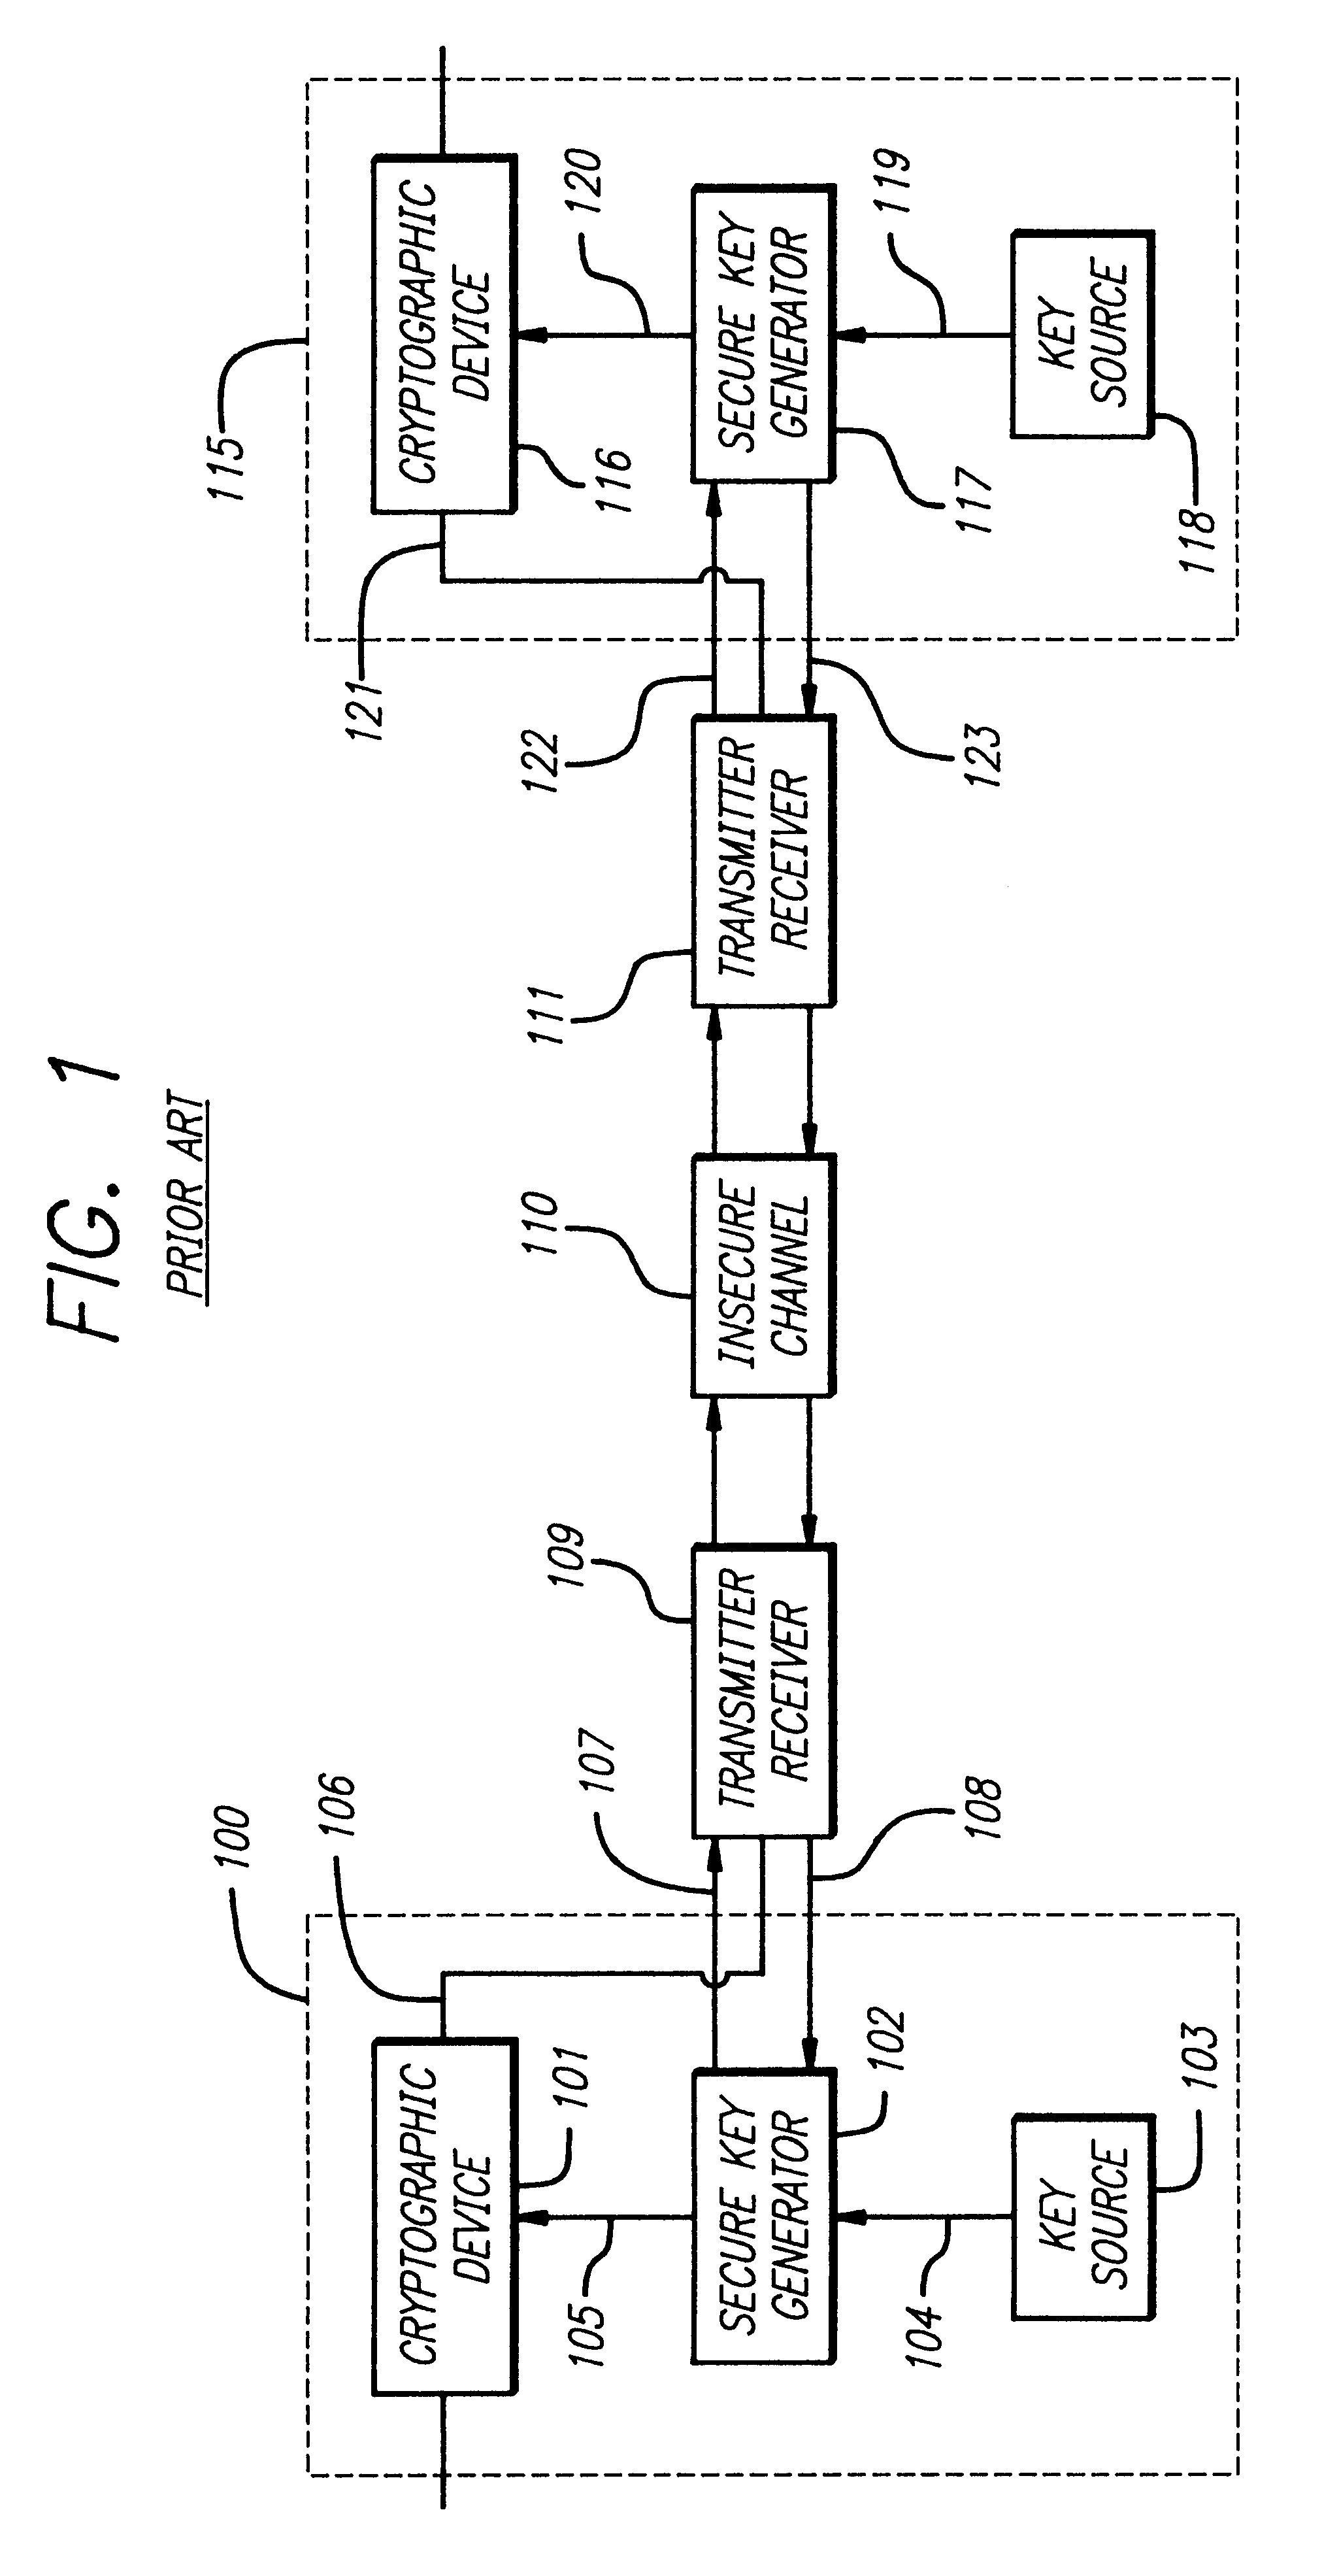 Method and apparatus for fast elliptic encryption with direct embedding